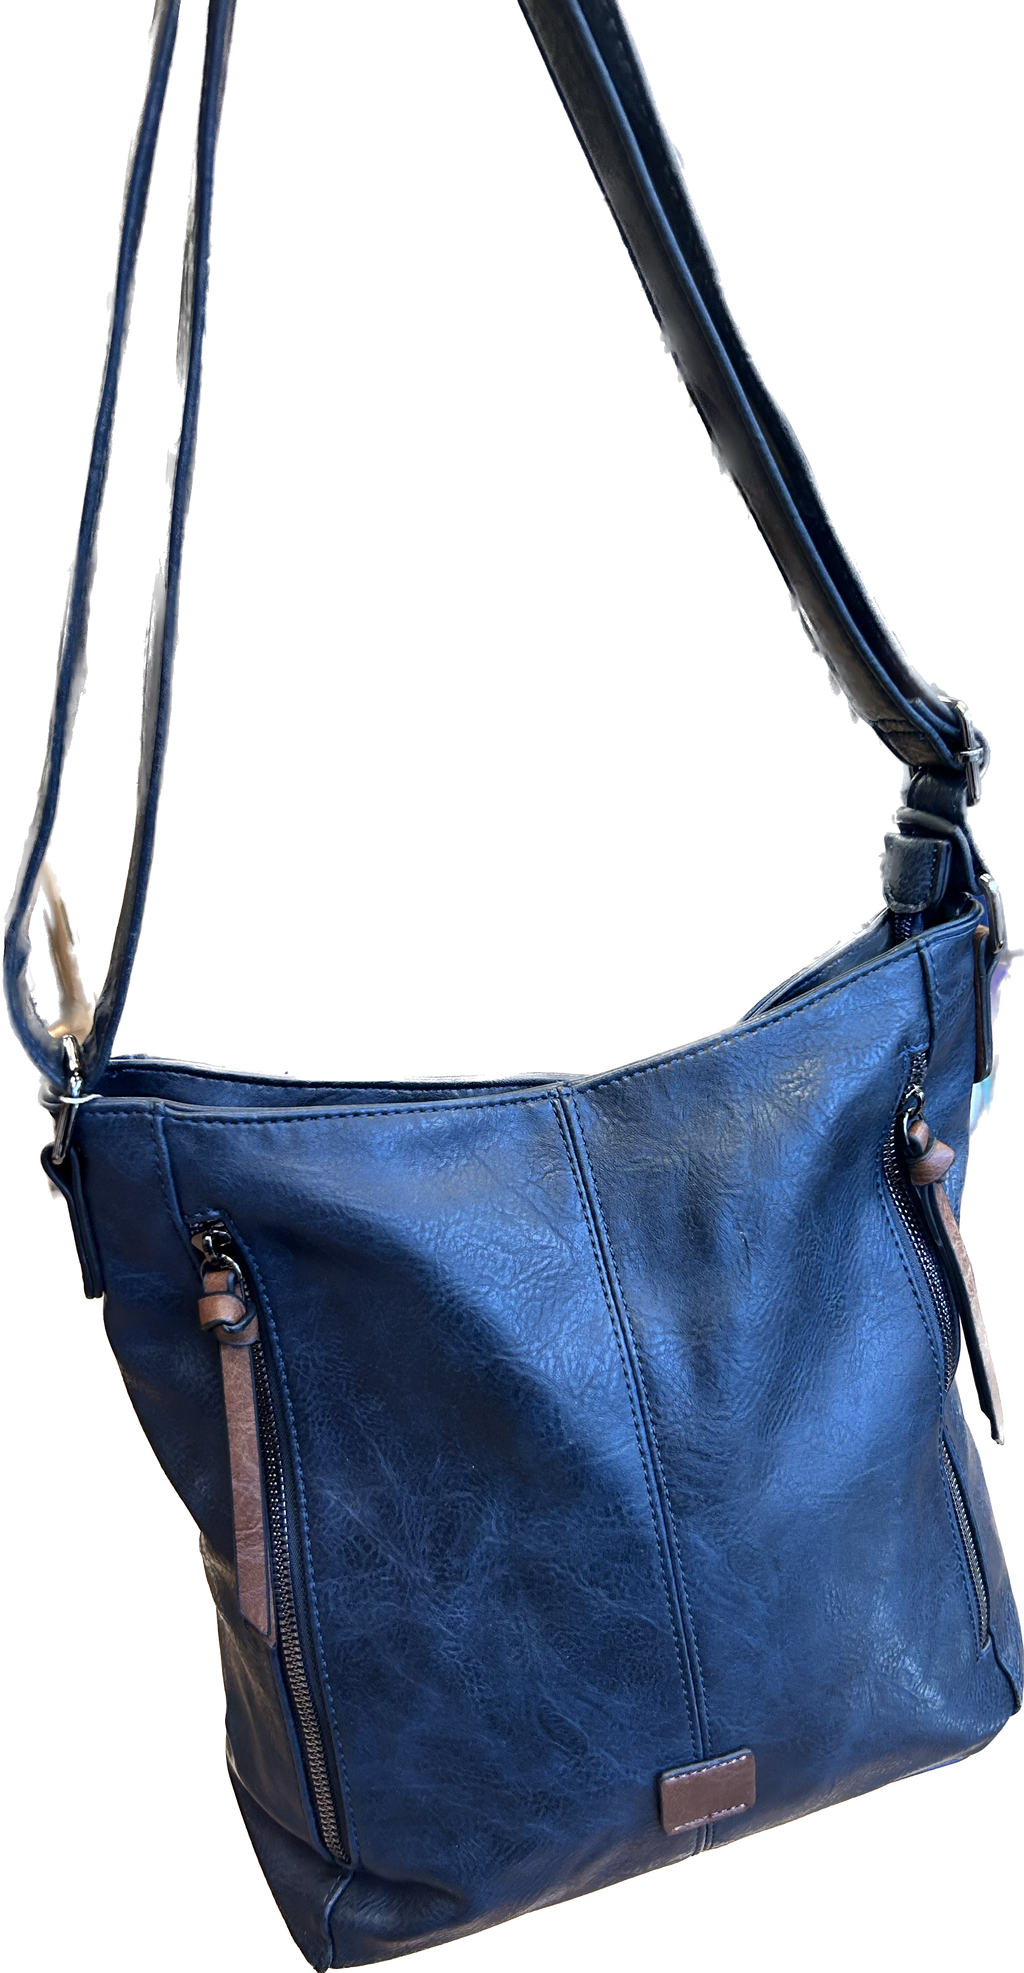 Crossbody Bag in Navy with Tan Accents & Zips